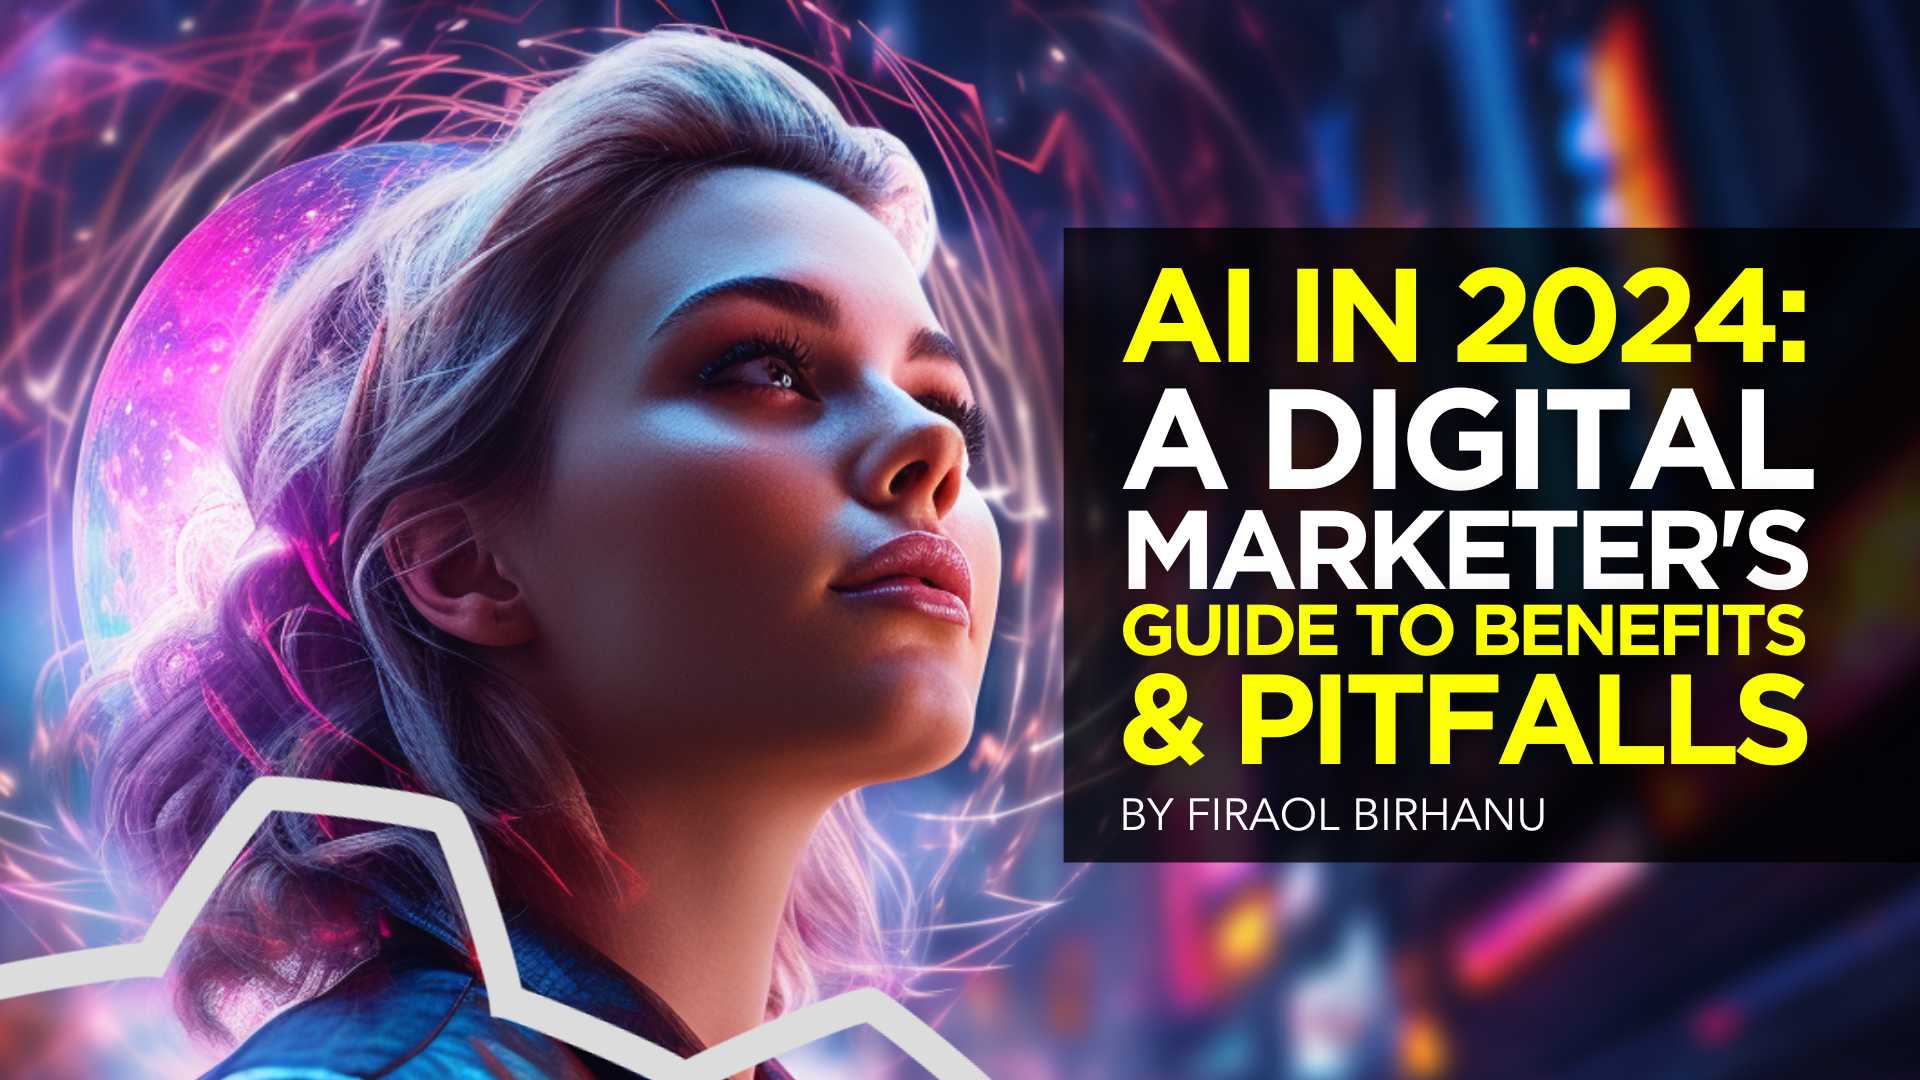 AI in 2024: A Digital Marketer's Guide to Benefits and Pitfalls